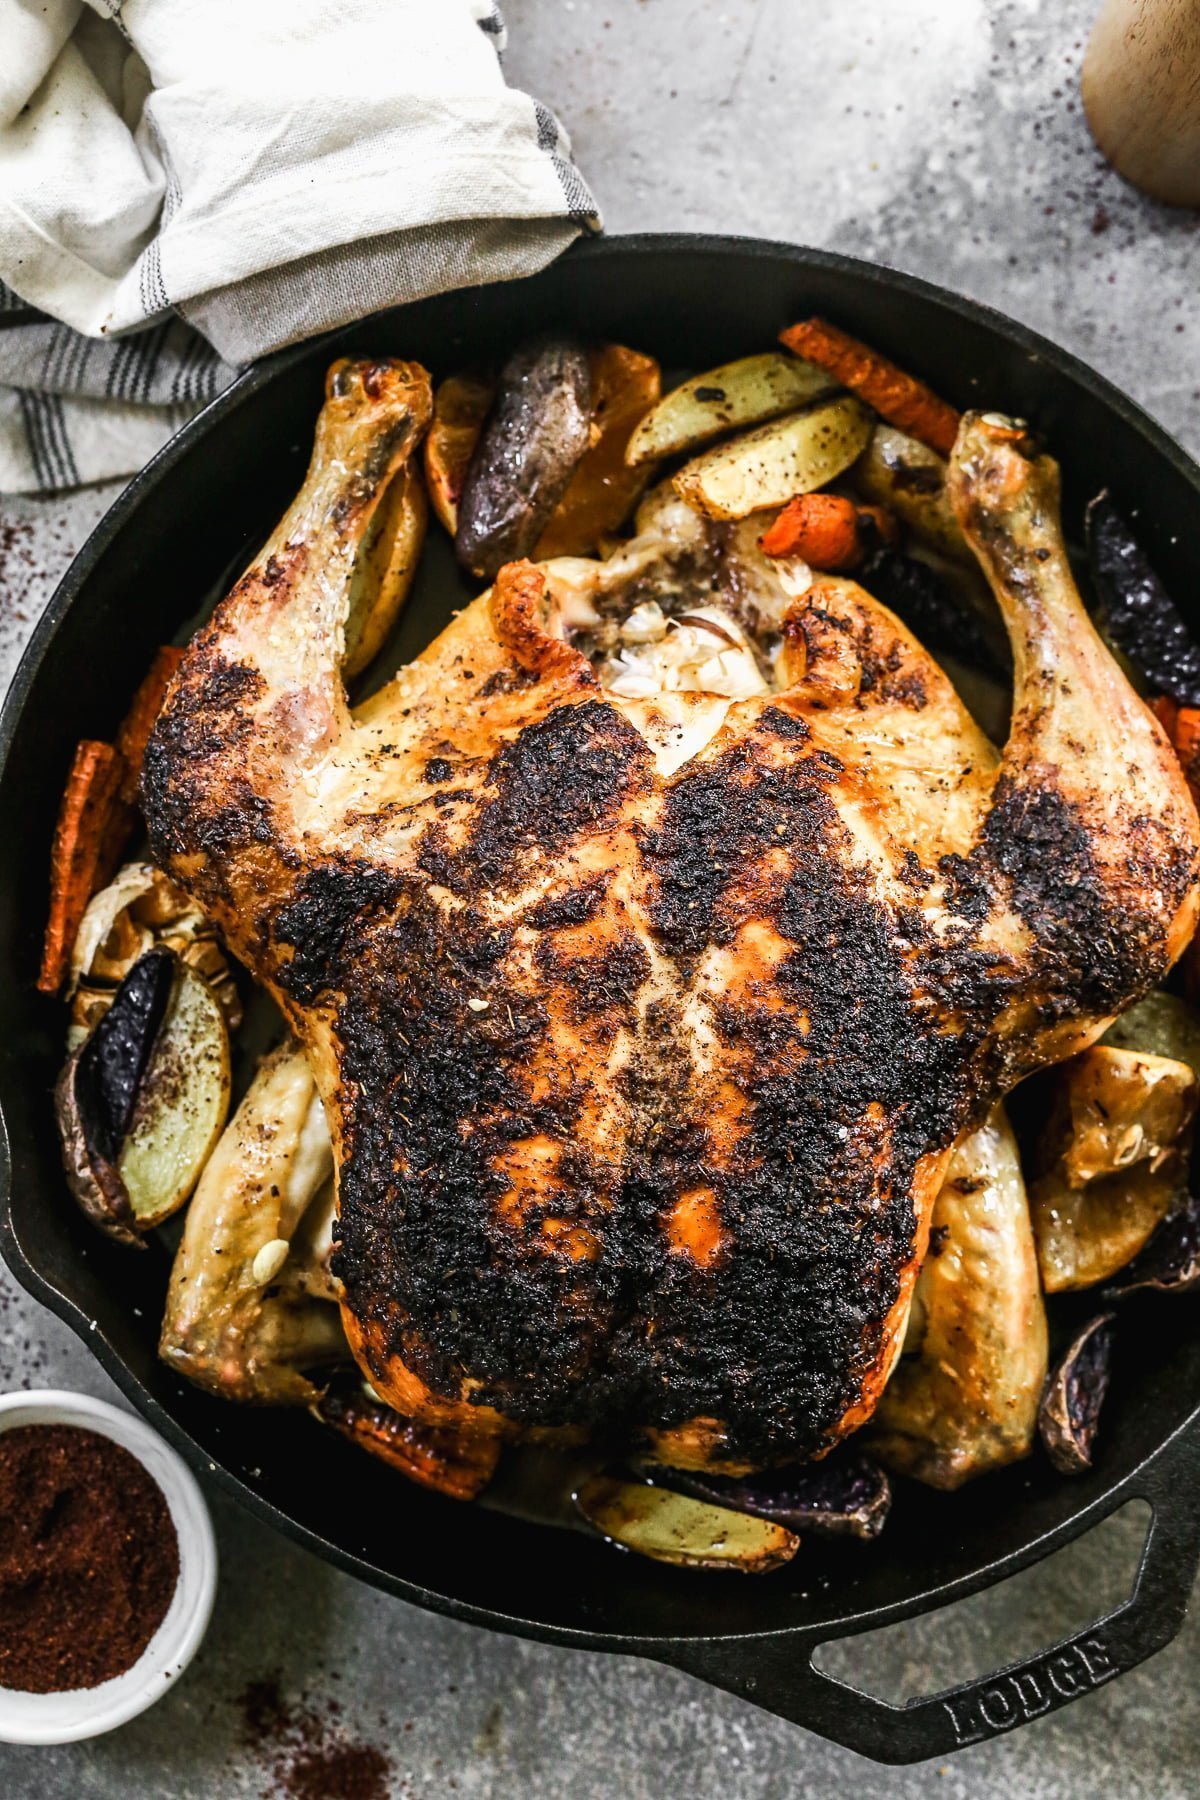 With a crispy sumac and garlic crusted skin and a juicy lemon-kissed interior, our Cast Iron Roast Chicken is not only perfectly delicious but the perfect fall dinner. Alongside the chicken, we scatter fingerling potatoes and whole carrots to sop up every bit of salty juice that drips to the bottom of the pan.